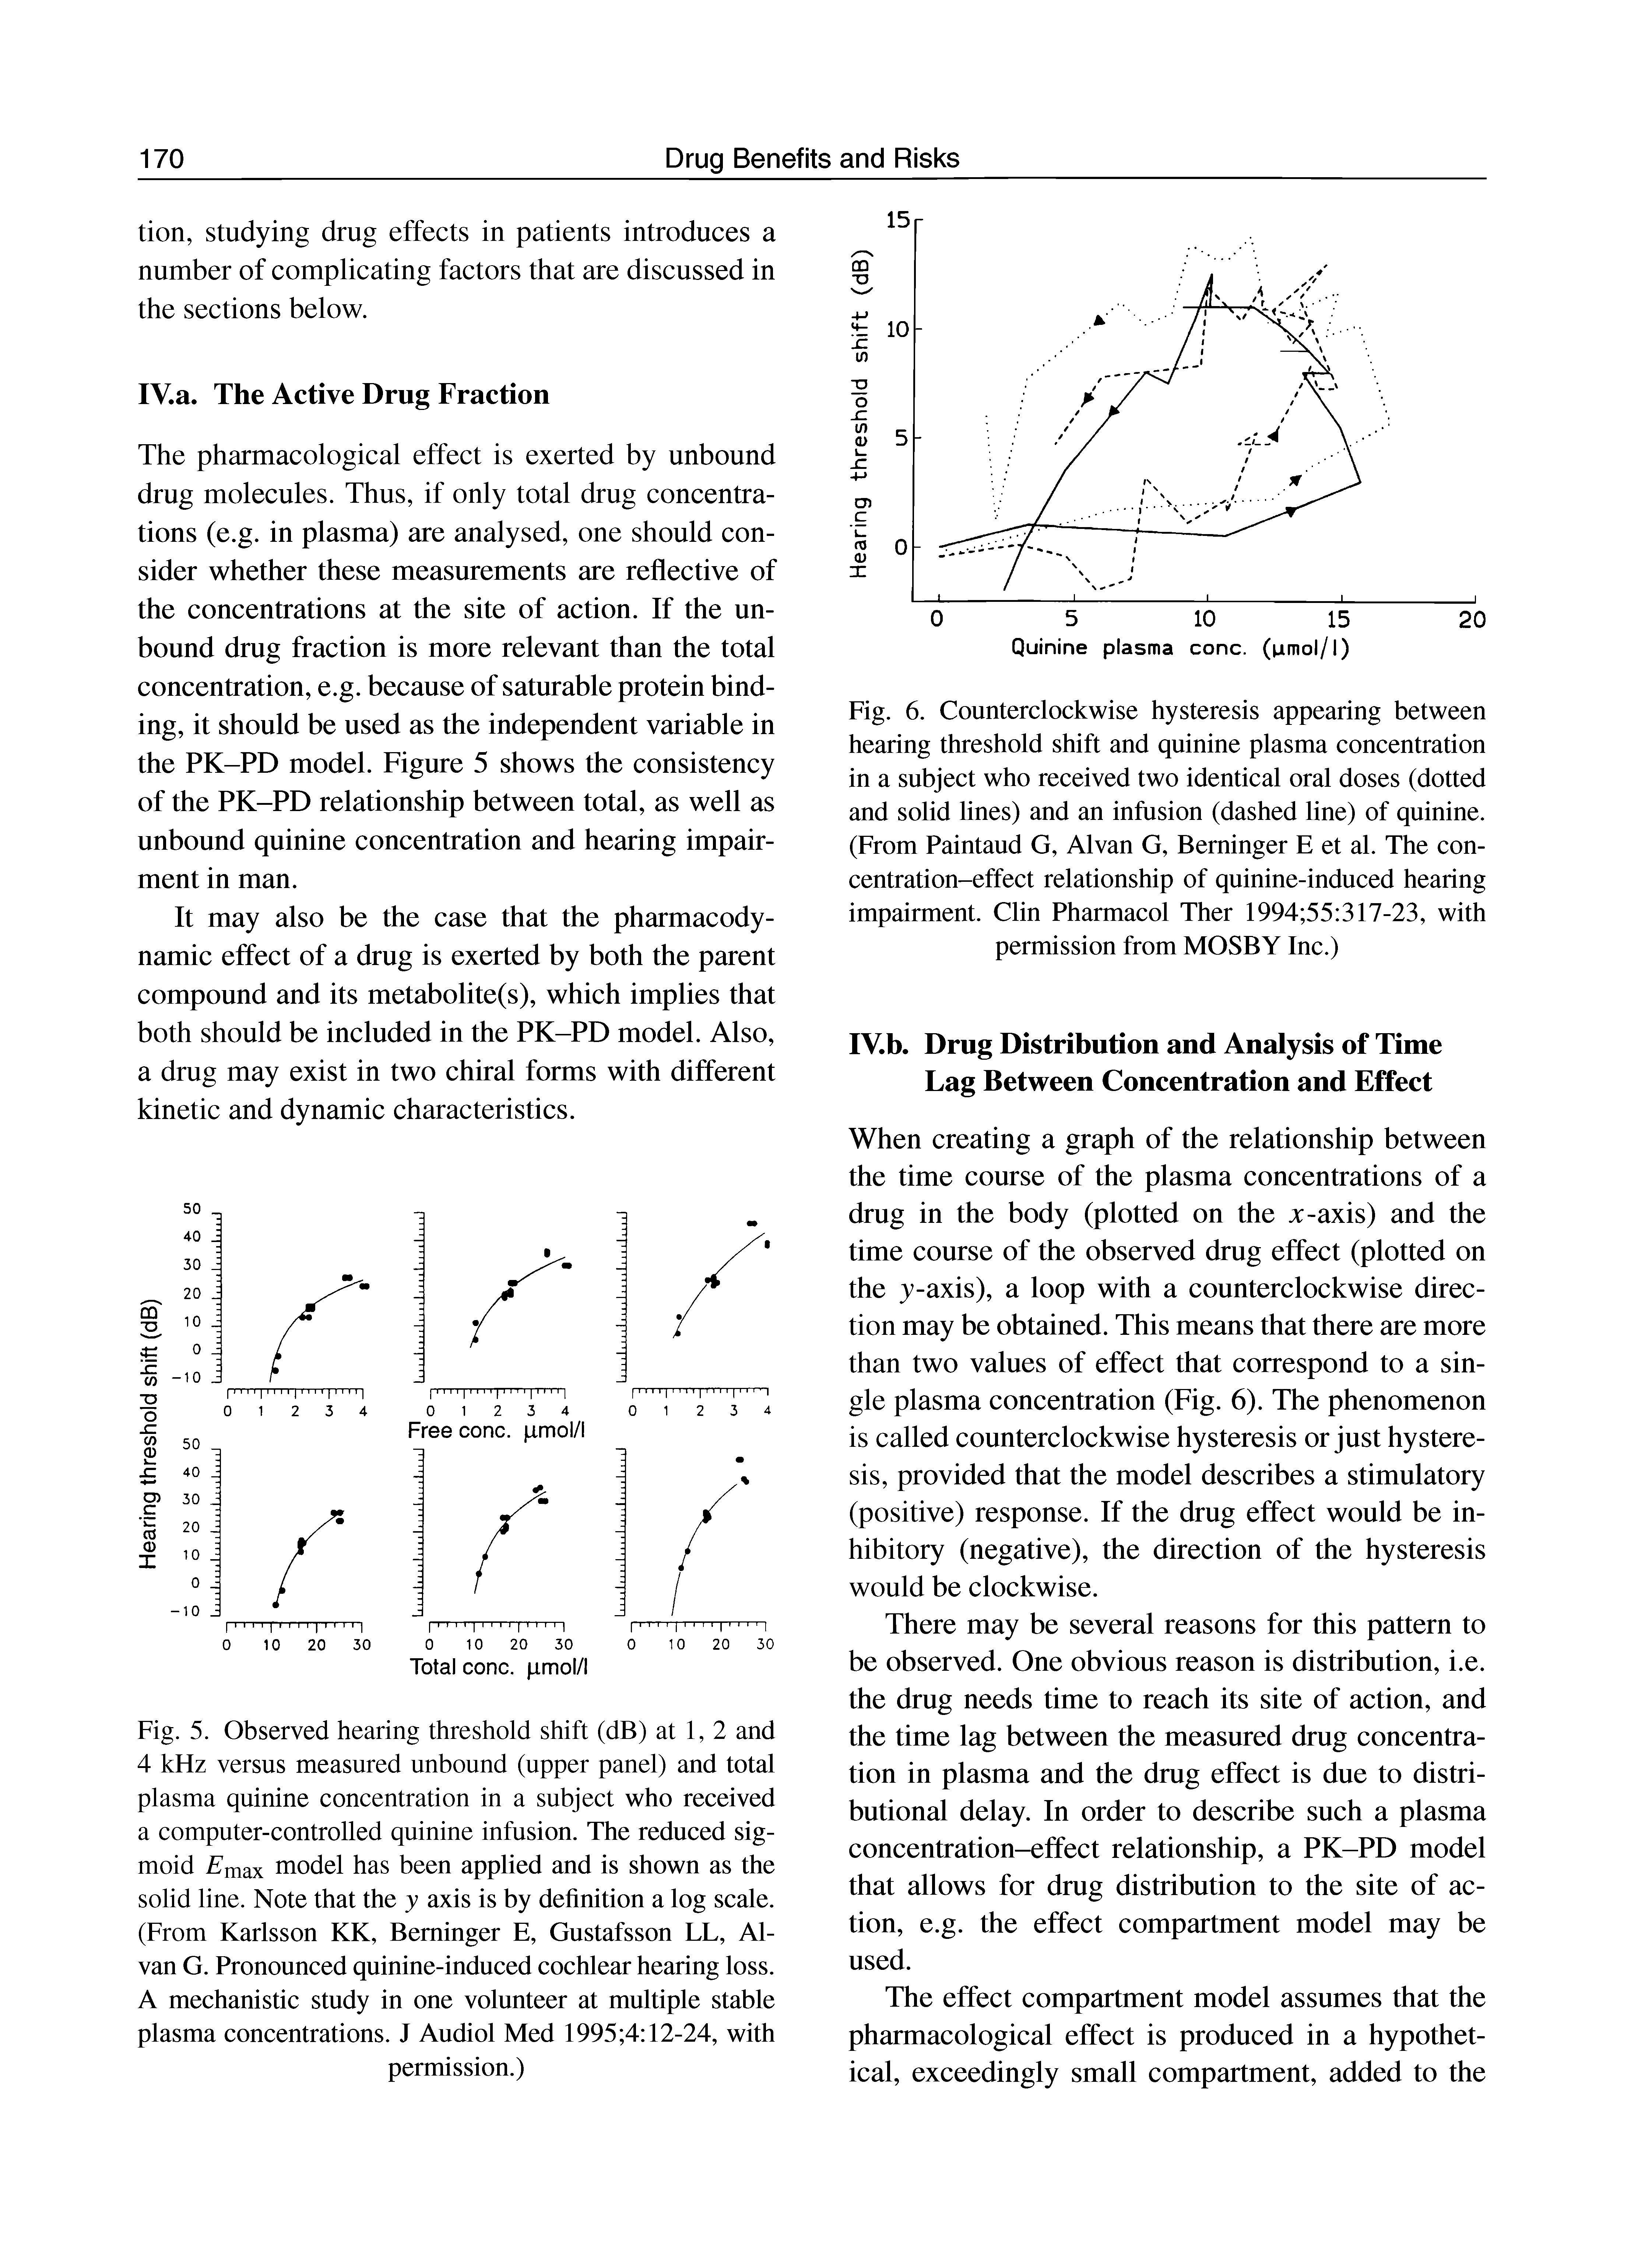 Fig. 6. Counterclockwise hysteresis appearing between hearing threshold shift and quinine plasma concentration in a subject who received two identical oral doses (dotted and solid lines) and an infusion (dashed line) of quinine. (From Paintaud G, Alvan G, Beminger E et al. The concentration-effect relationship of quinine-induced hearing impairment. Clin Pharmacol Ther 1994 55 317-23, with permission from MOSBY Inc.)...